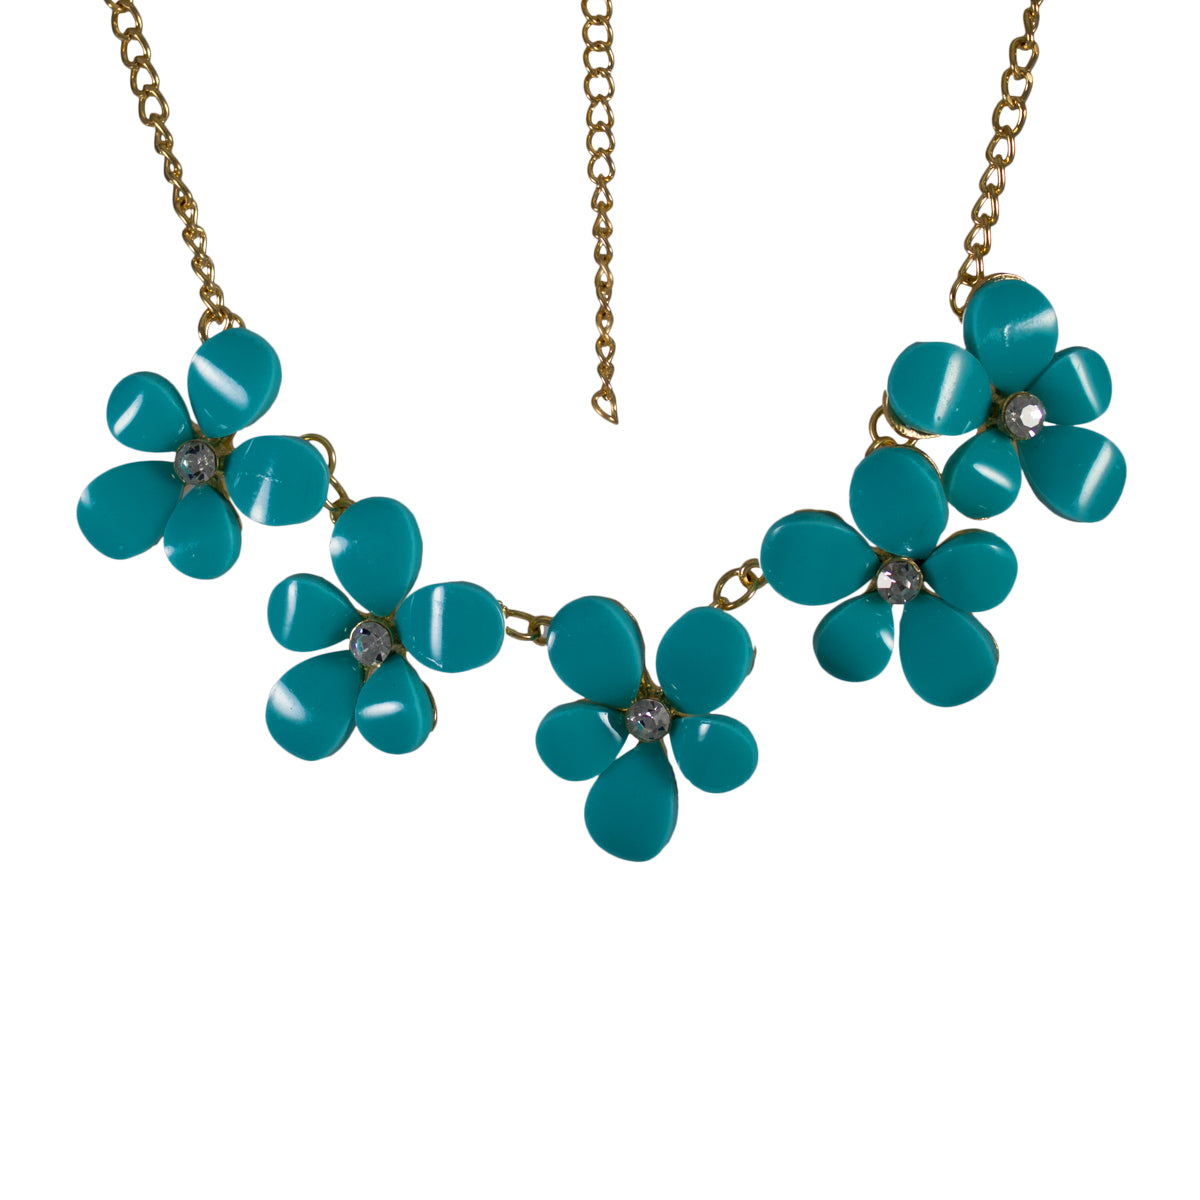 Beautiful Blue Floral Designer Statement Necklace with Crystal Stones